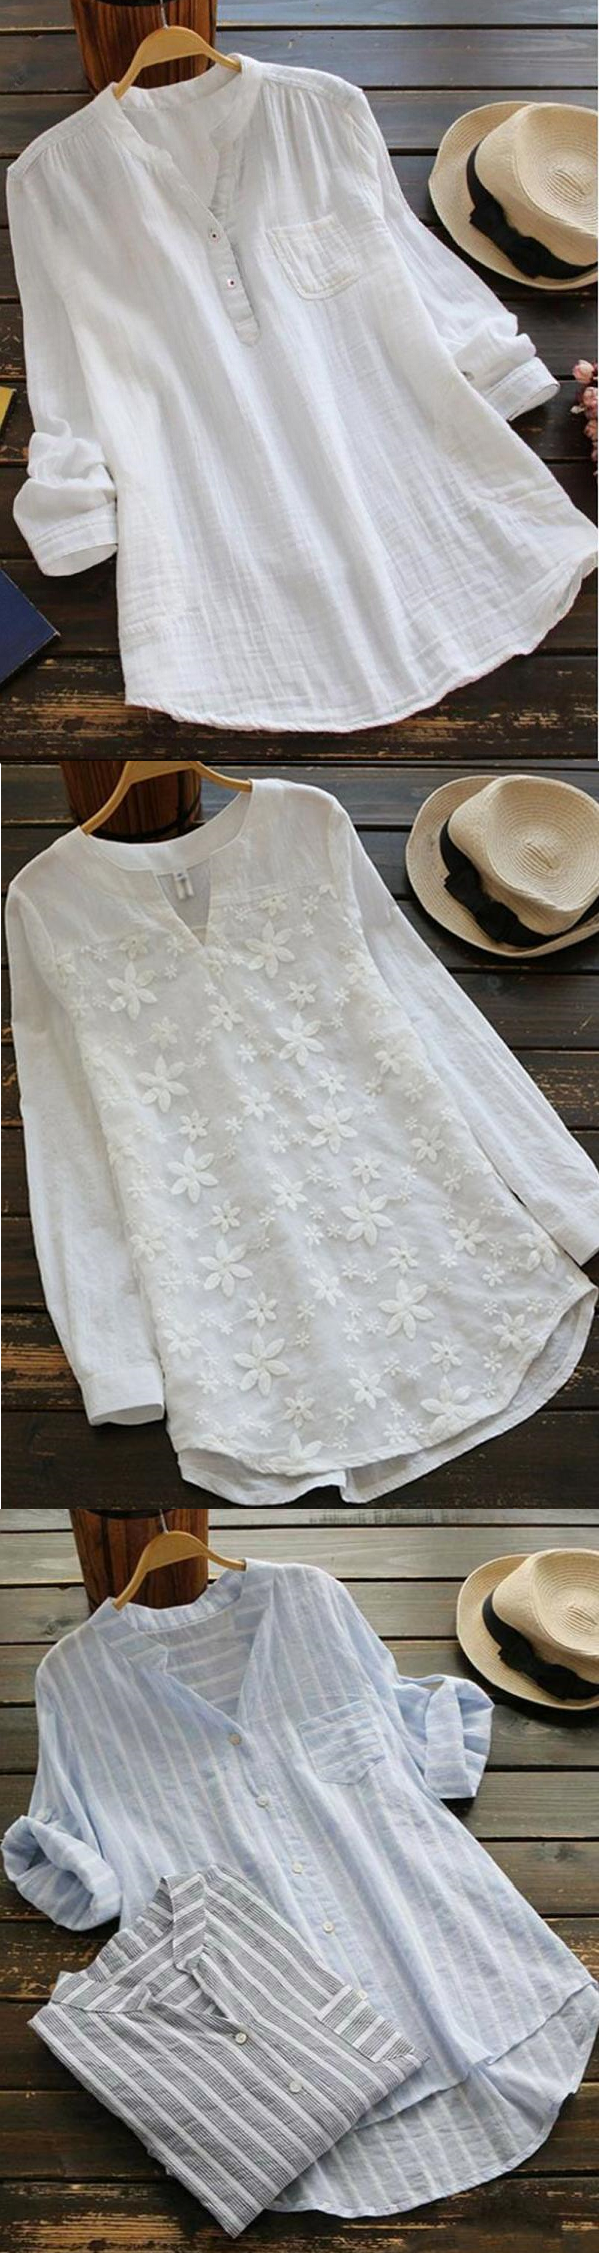 Up to 67% OFF! Shop Now>>New Arrival Spring Blouse Tops -   20 asian style fashion
 ideas